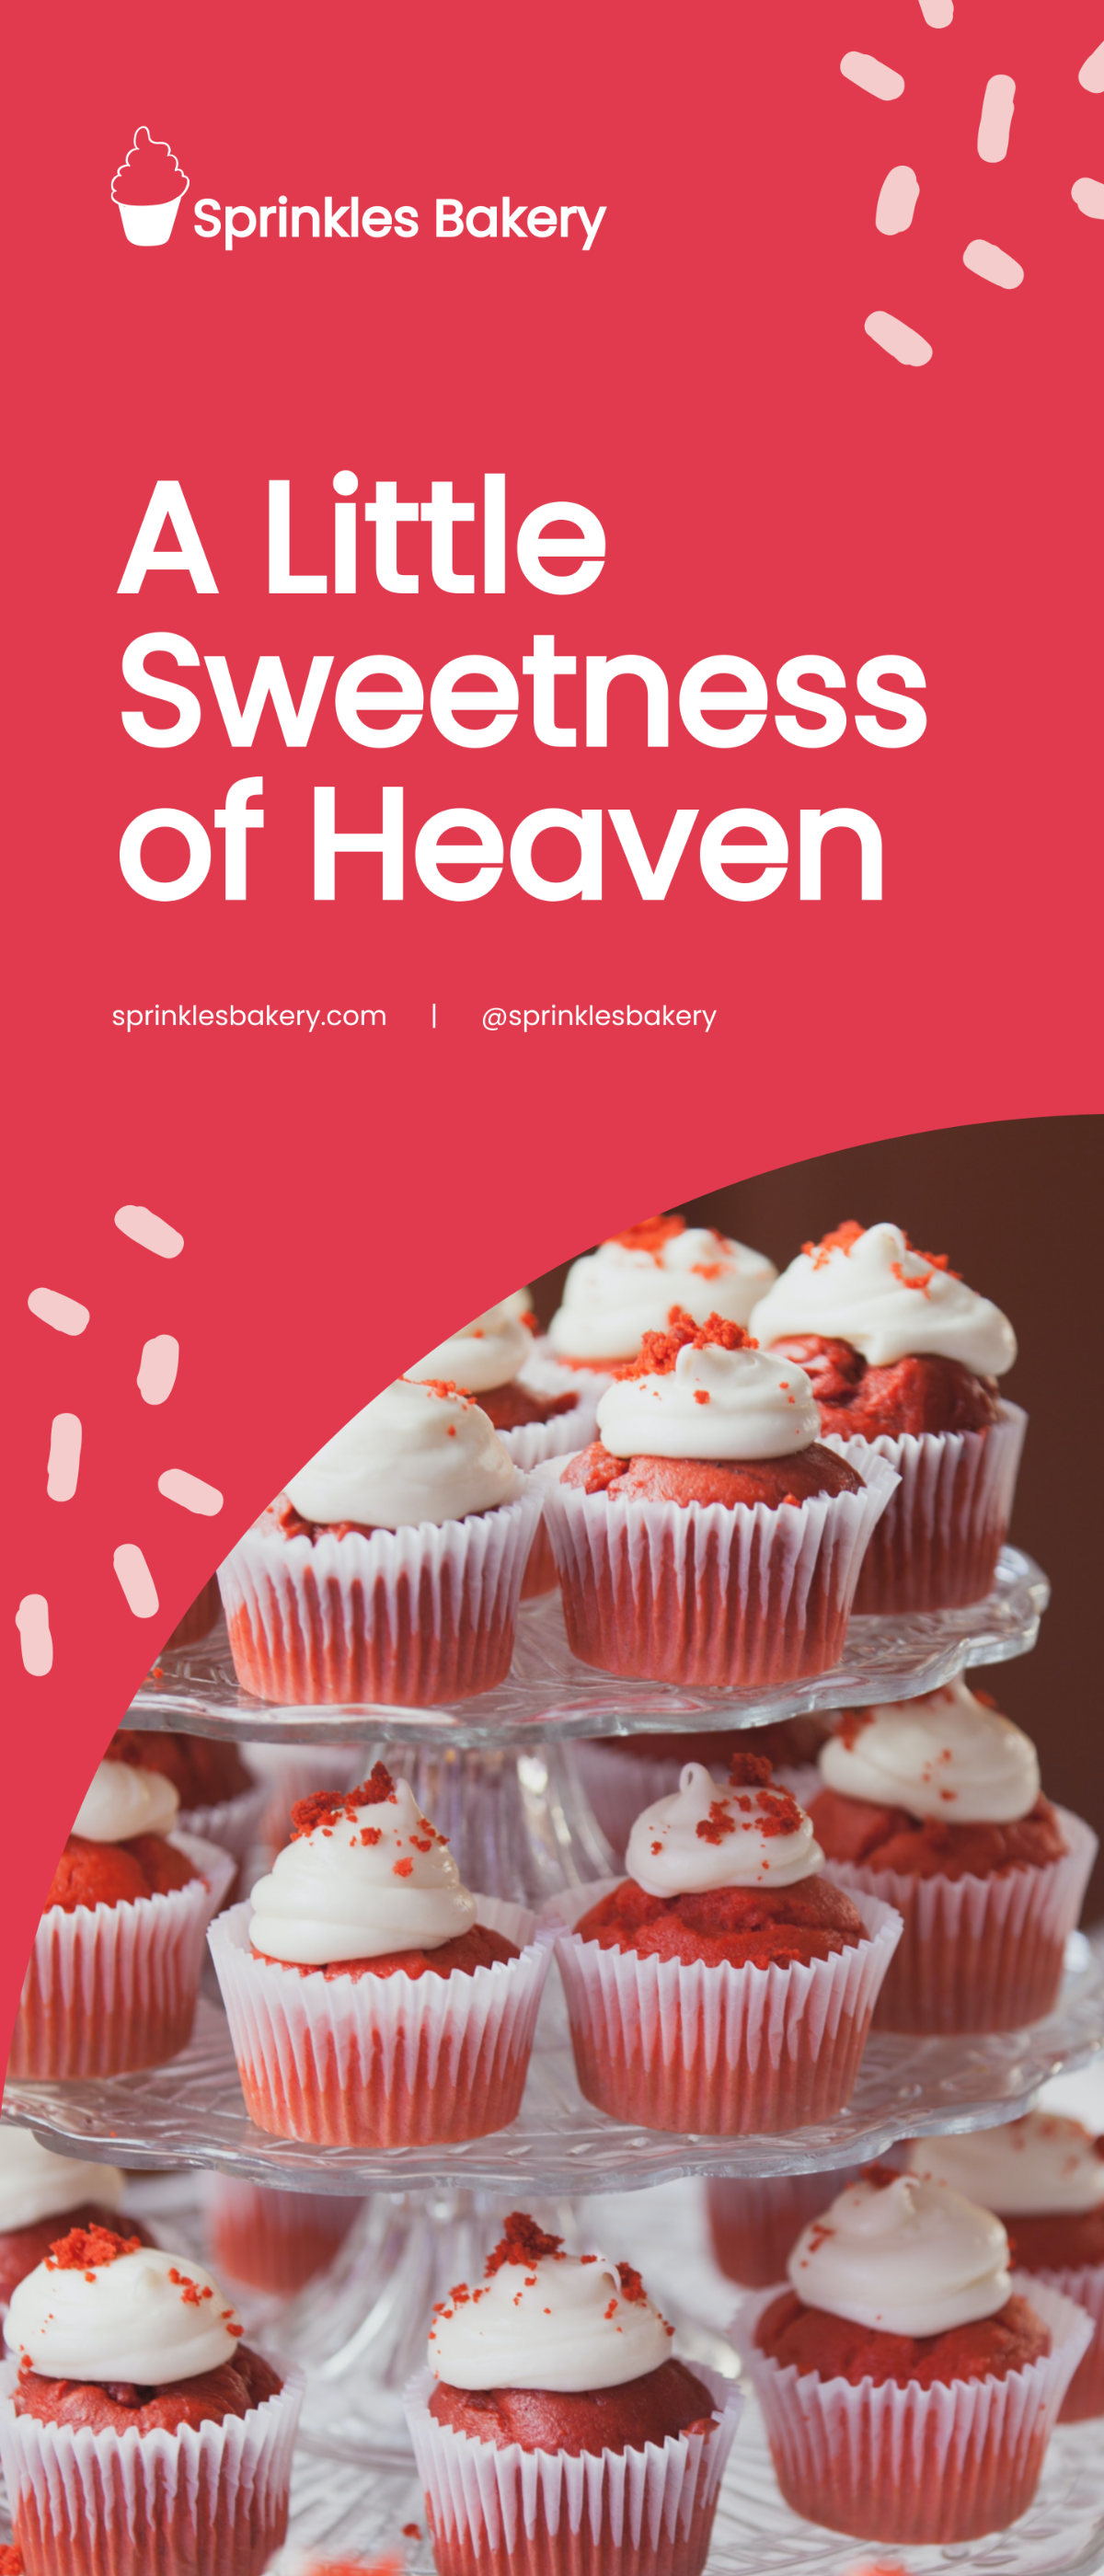 Cupcake Rollup Banner Template